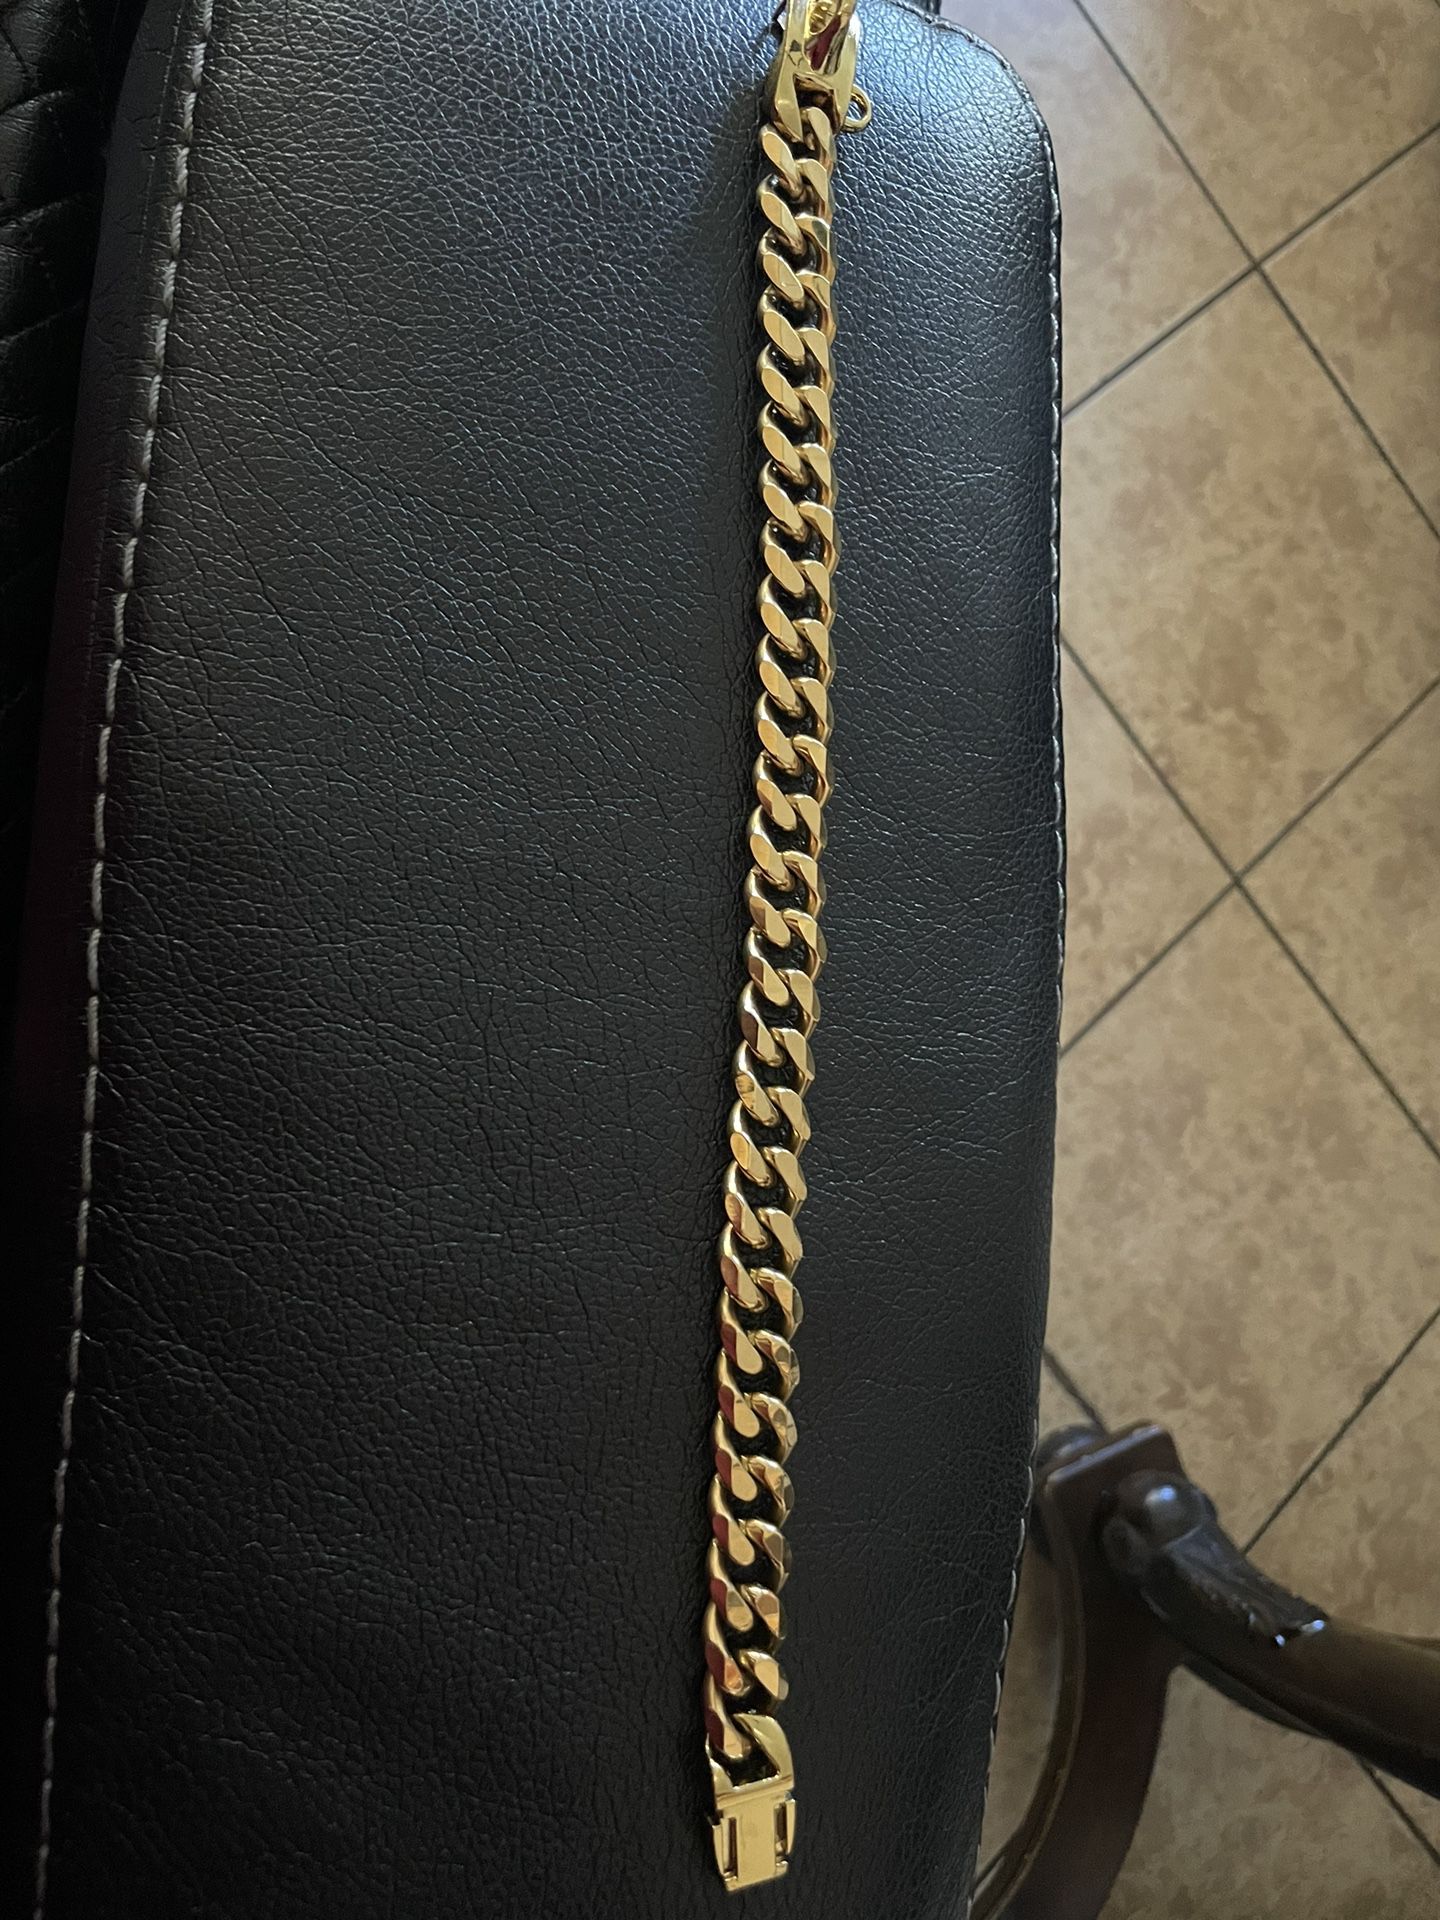 18k Gold Plated Dog Chain